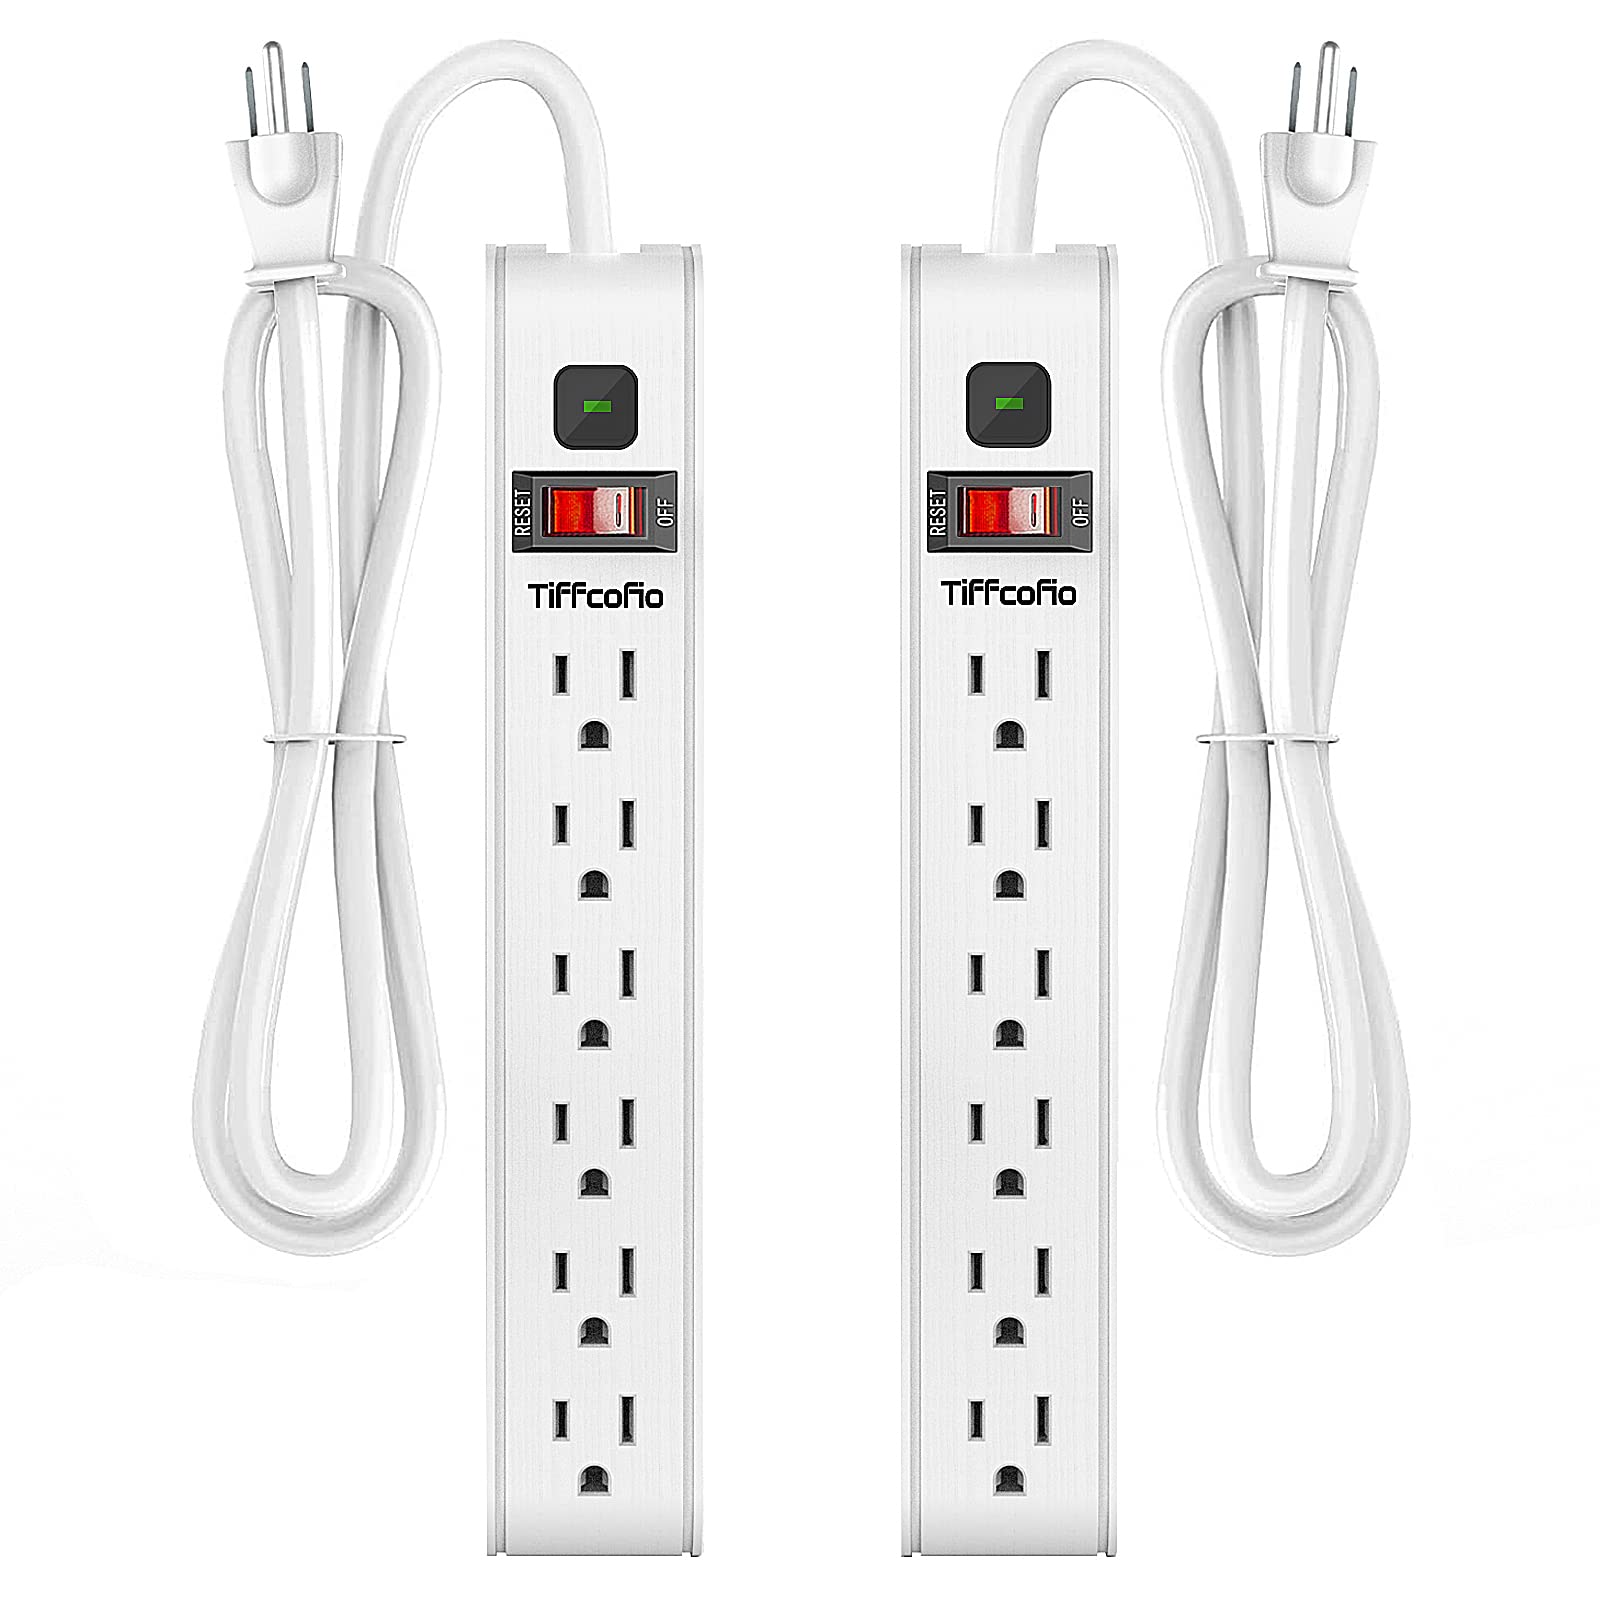 2-Pack 6-Outlet Tiffcofio Power Strip Extension Cord (White, 4 Feet) $9.99 ($4.99 each) + Free Shipping w/ Prime or on $35+